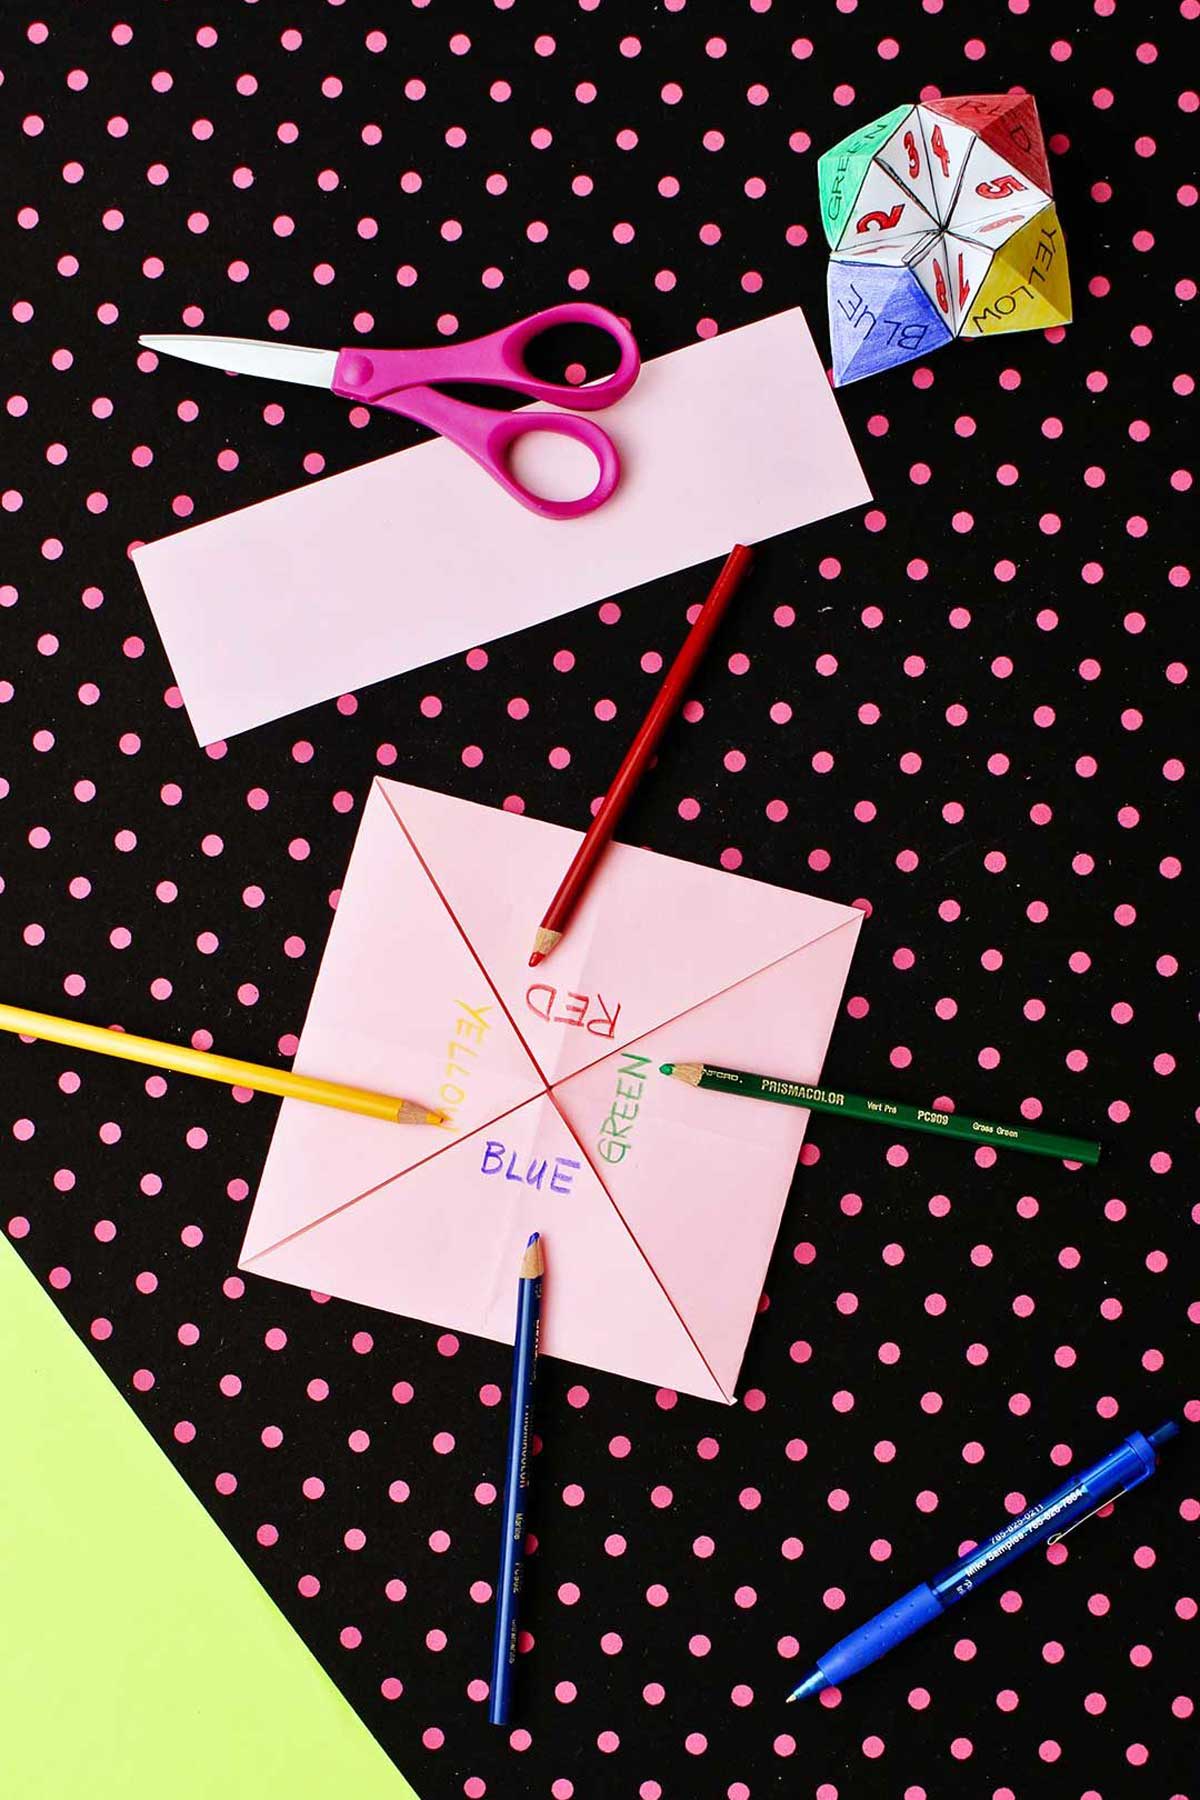 Four tabs on a square pink piece of paper saying "red, green, yellow, blue" with scissors and colored pencils laying on a black and pink polka dotted background.